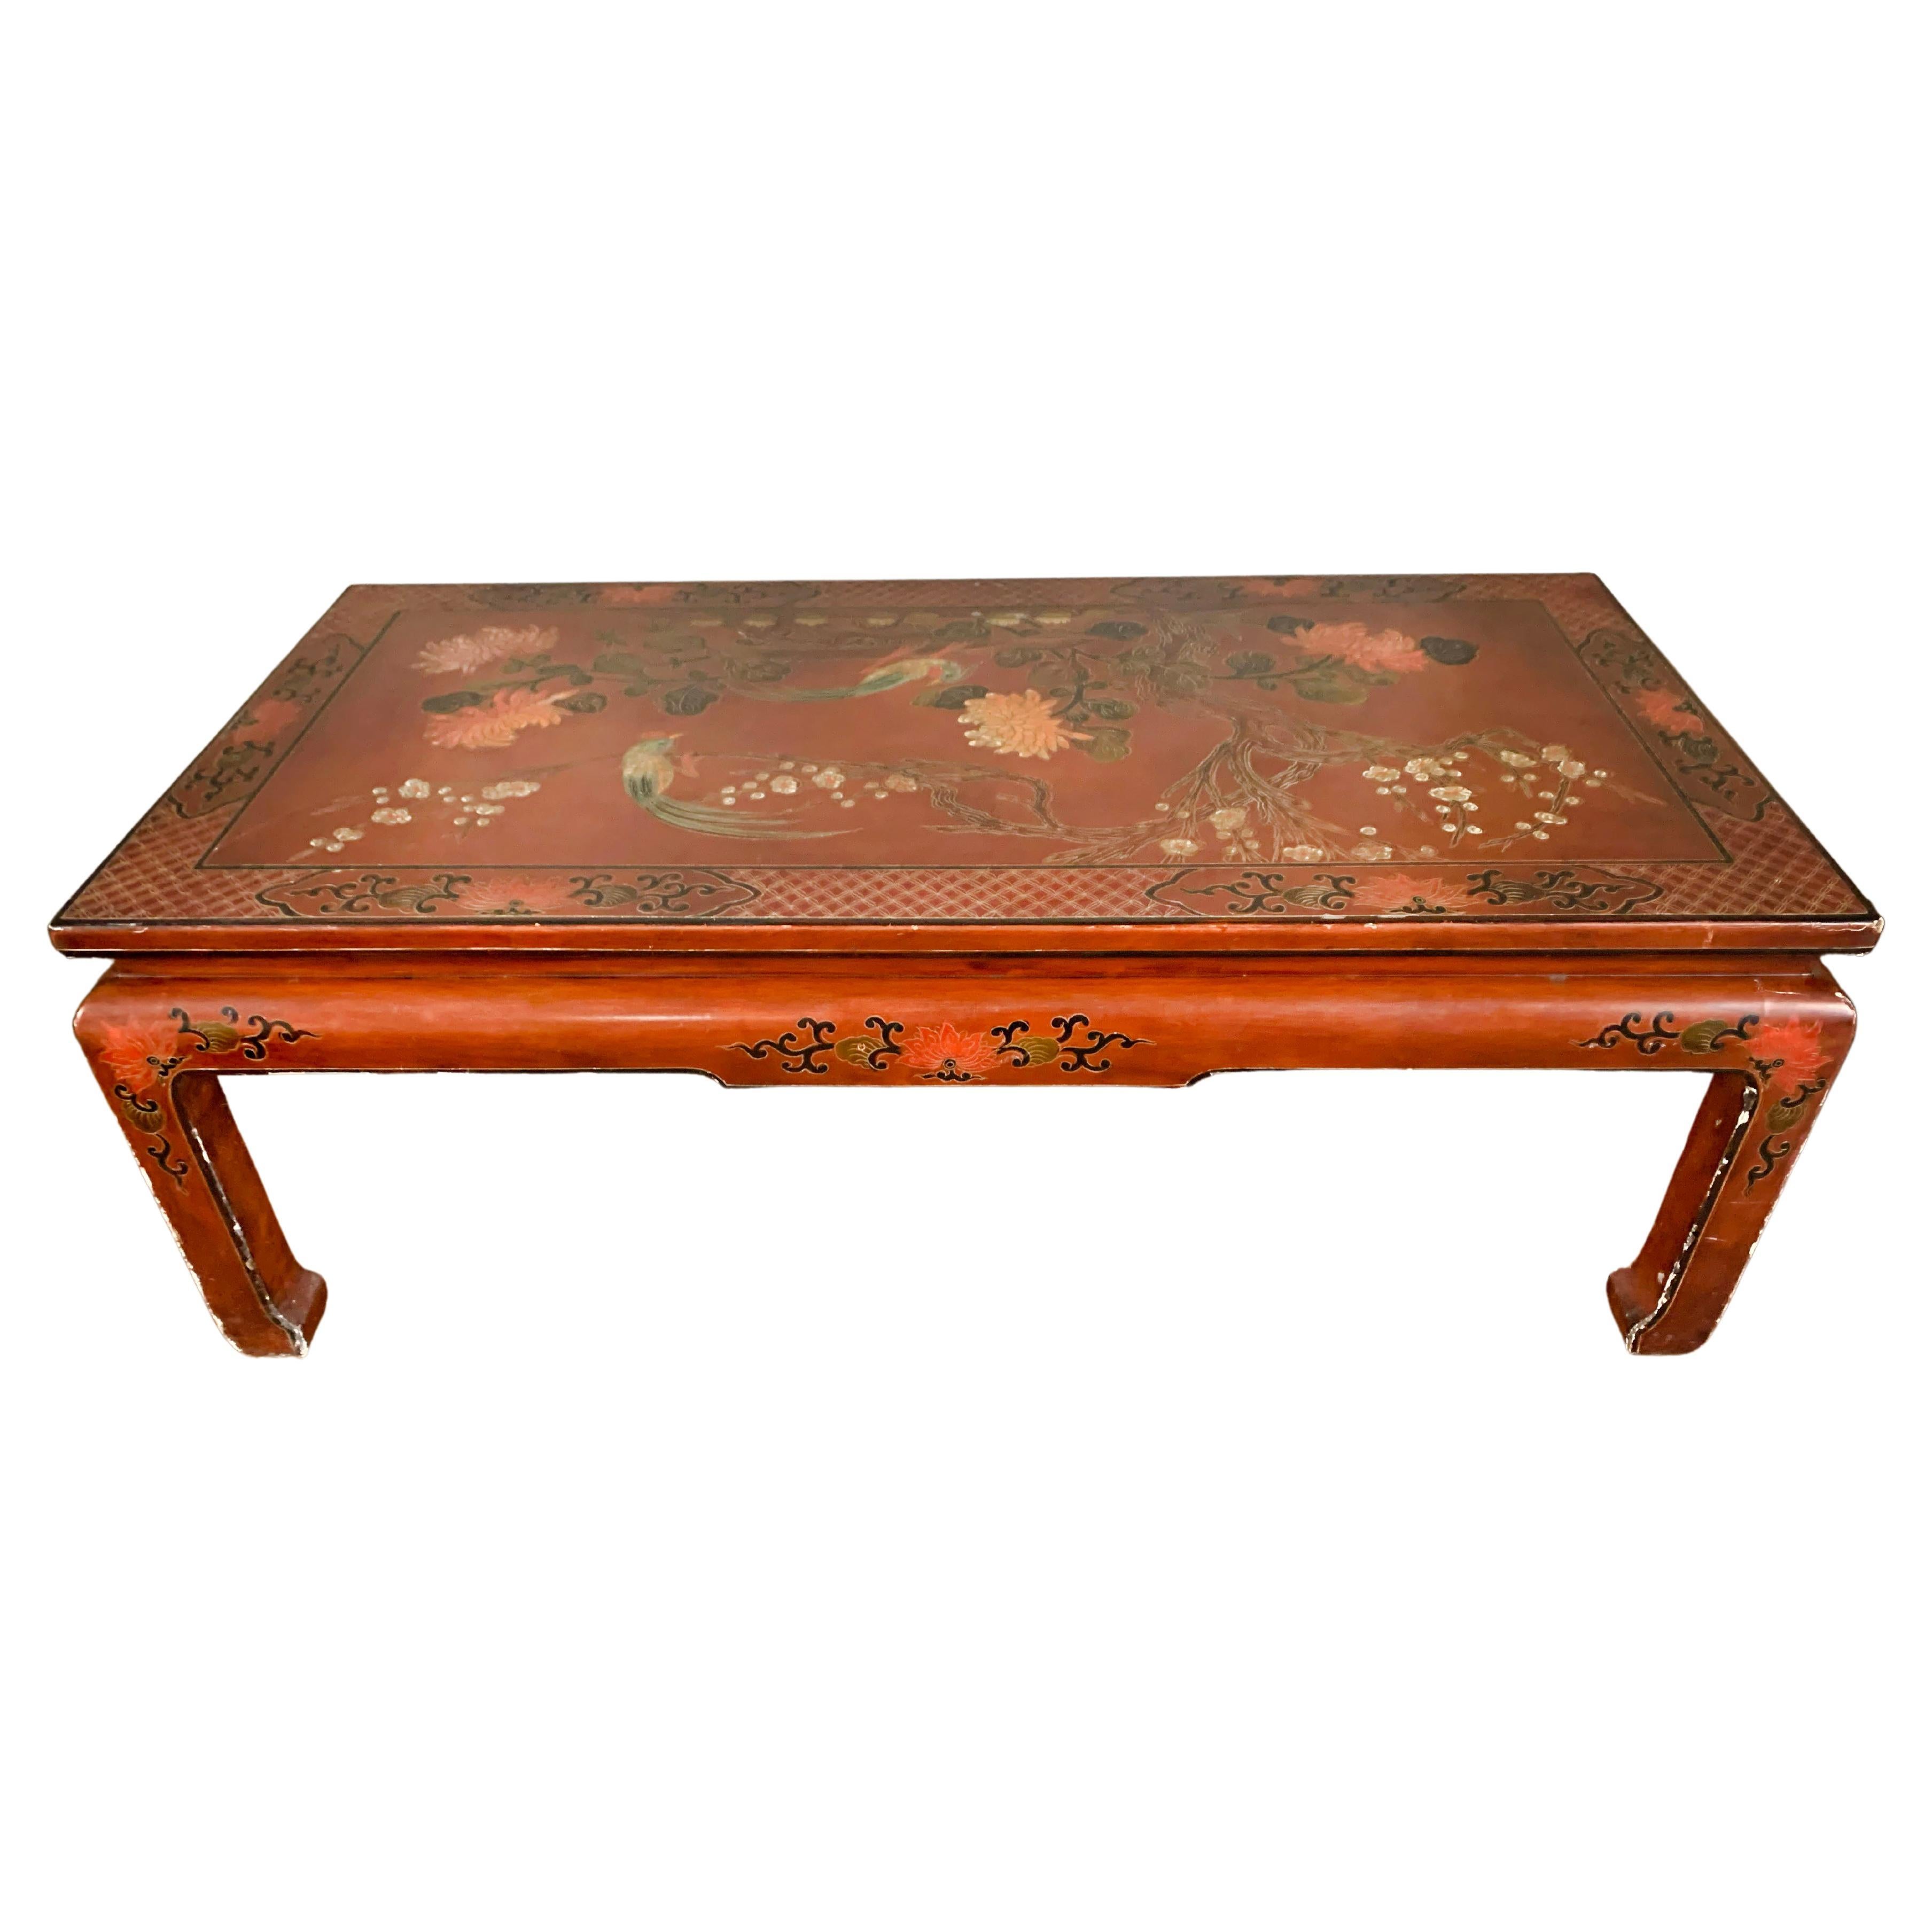 Table en laque rouge chinoise